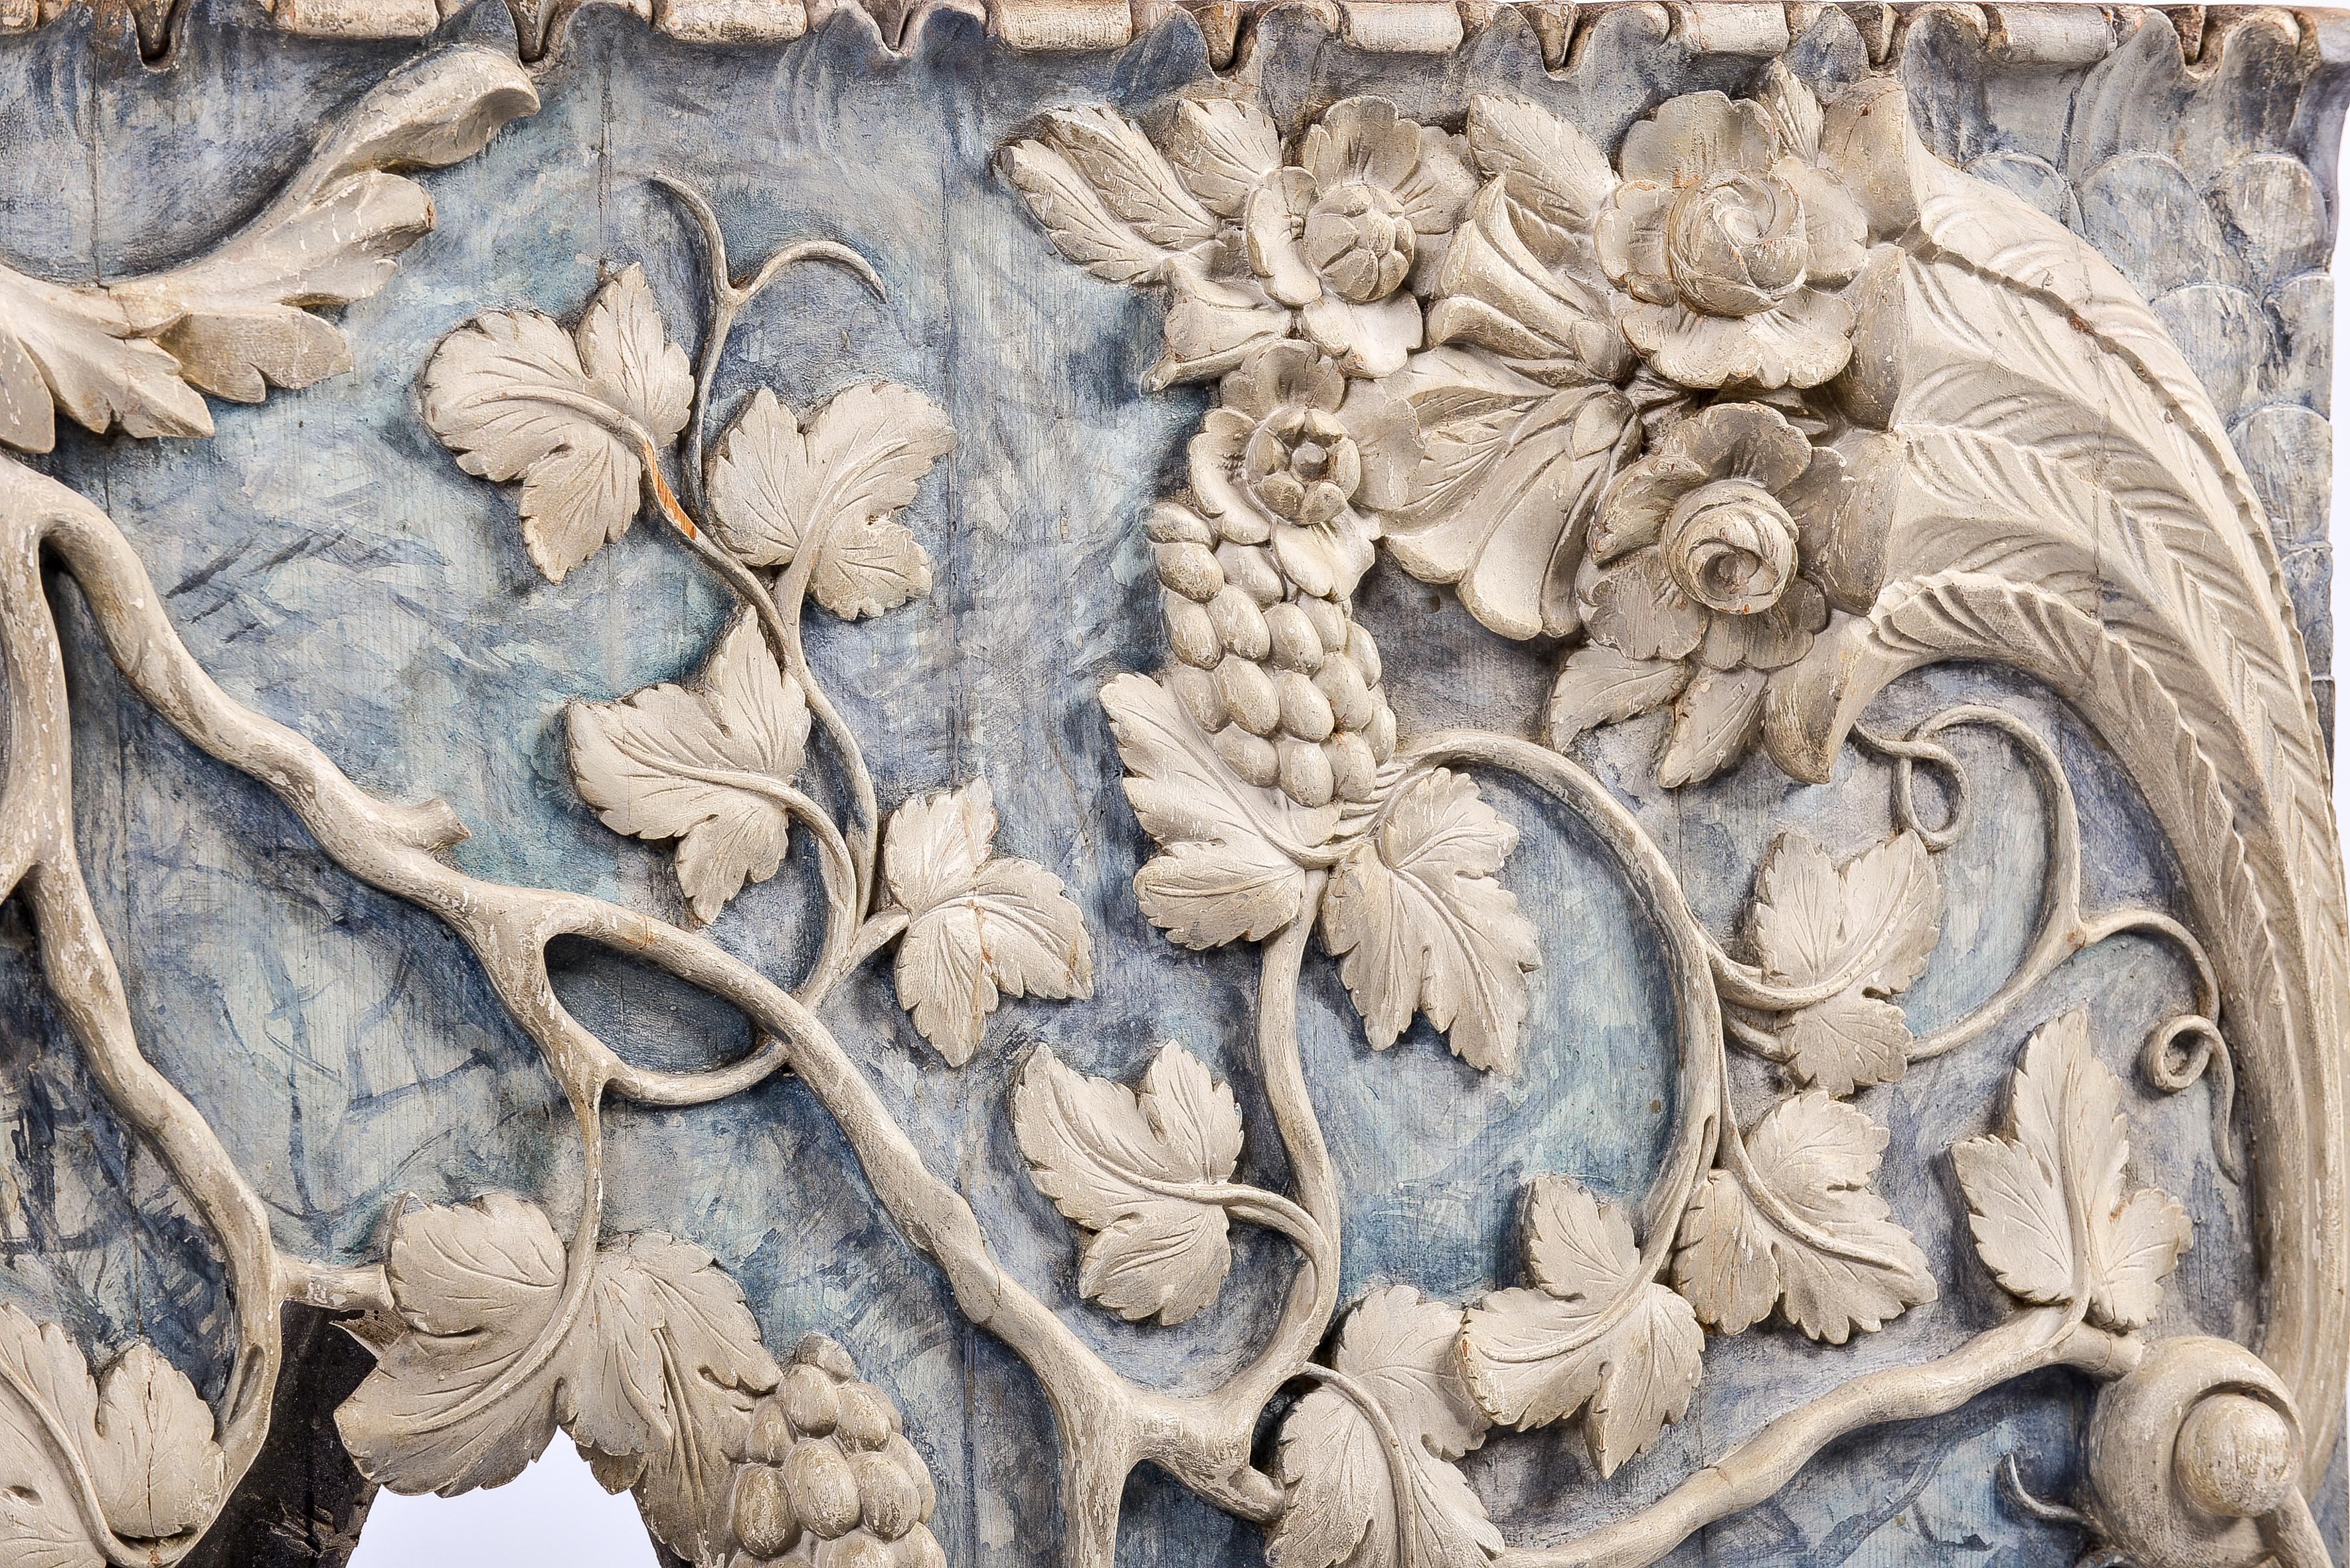 Hand-Carved 19th Century Carved White and Blue Polychromed Grapevines Architectural Frieze